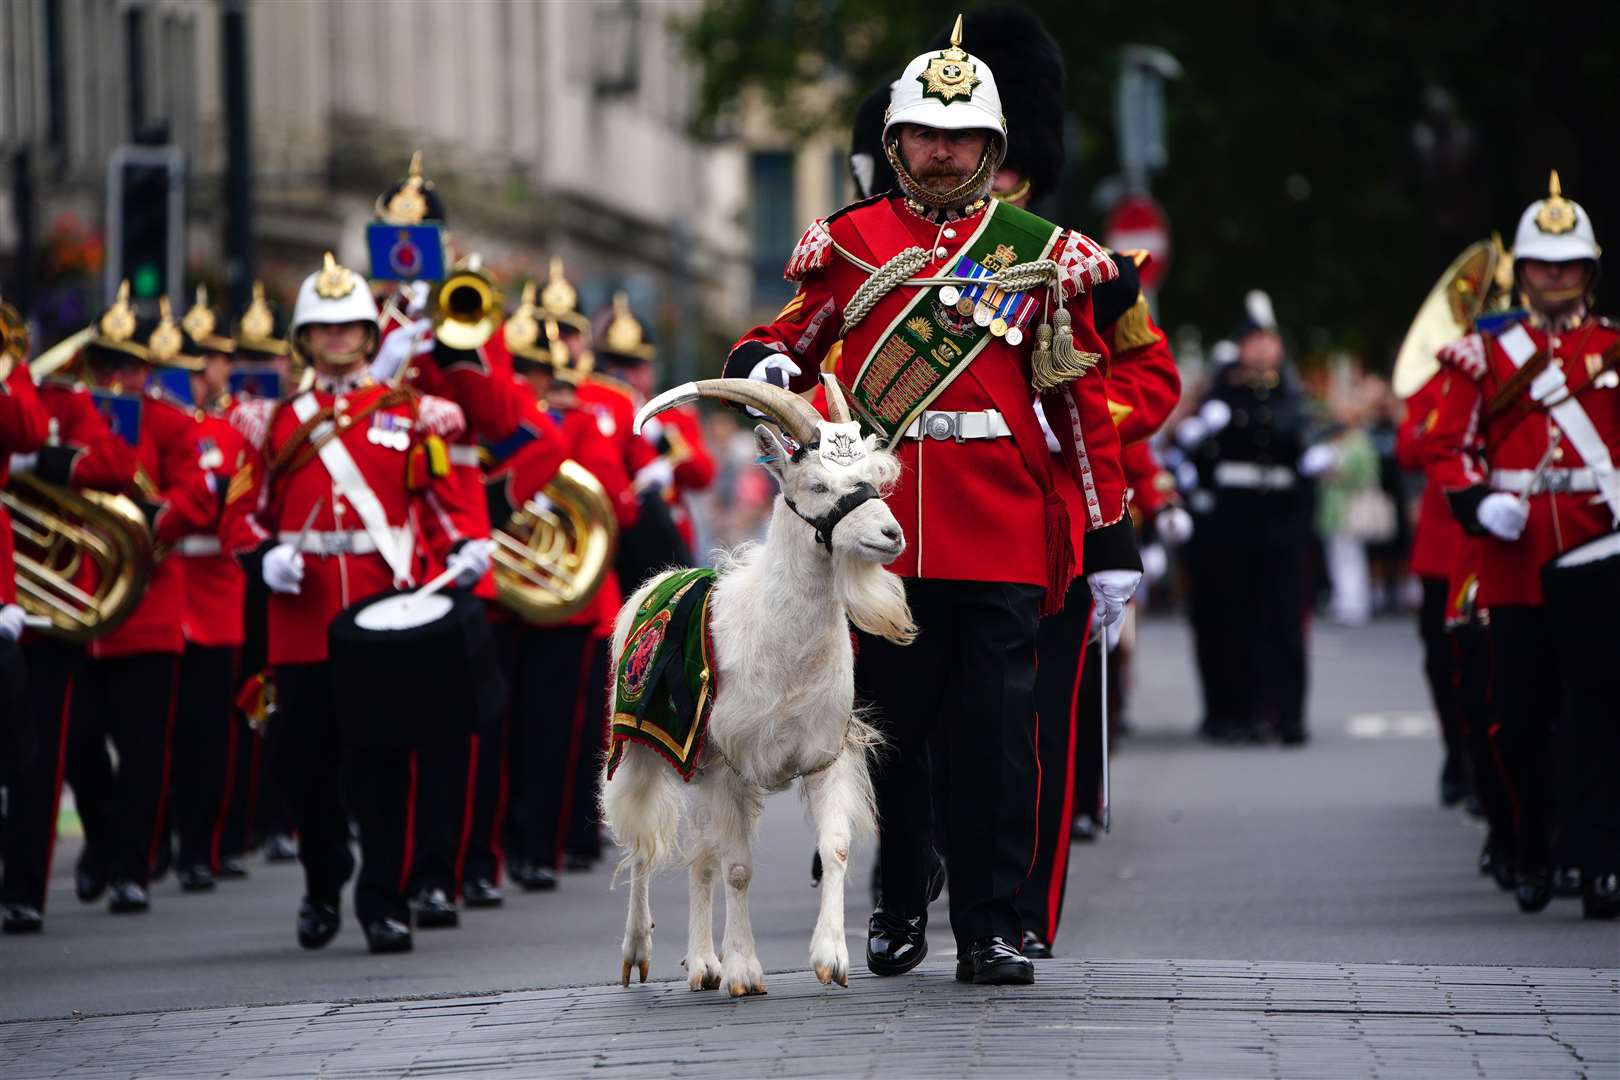 Lance Corporal Shenkin IV, the regimental mascot goat, accompanies the 3rd Battalion of the Royal Welsh regiment at the accession proclamation ceremony (Ben Birchall/PA)